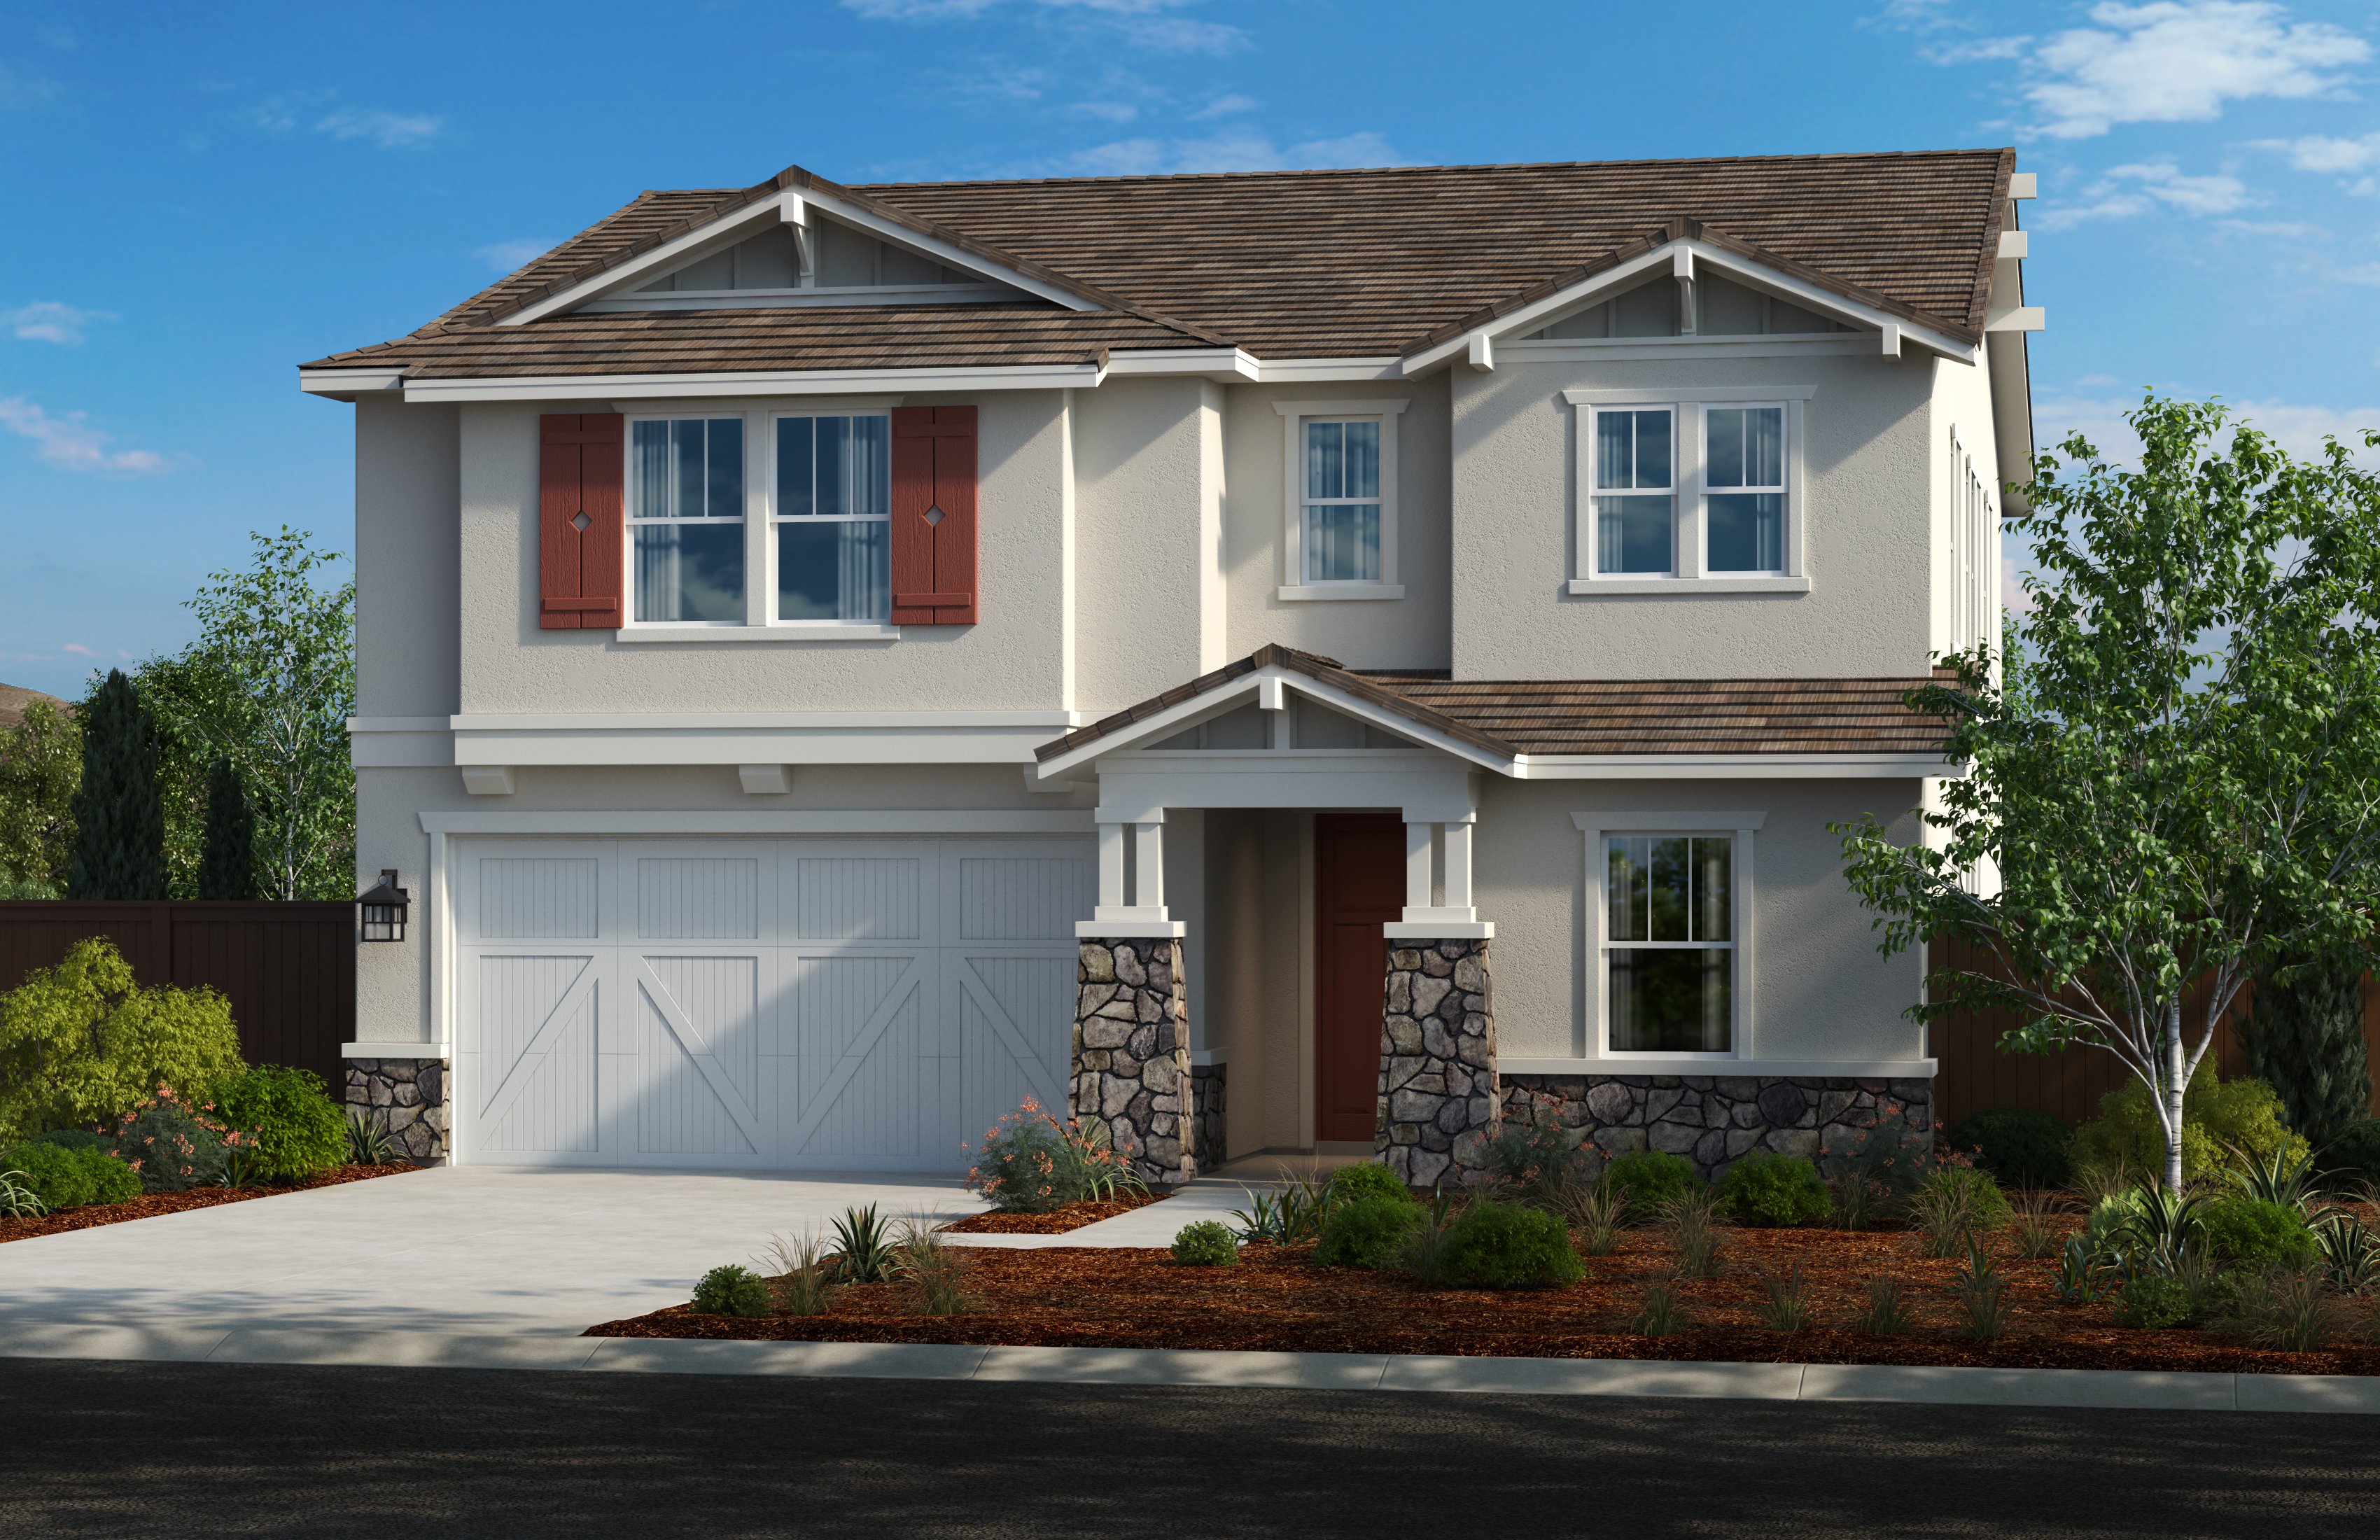 New Homes in 990 Woodhaven Rd., CA - Plan 2913